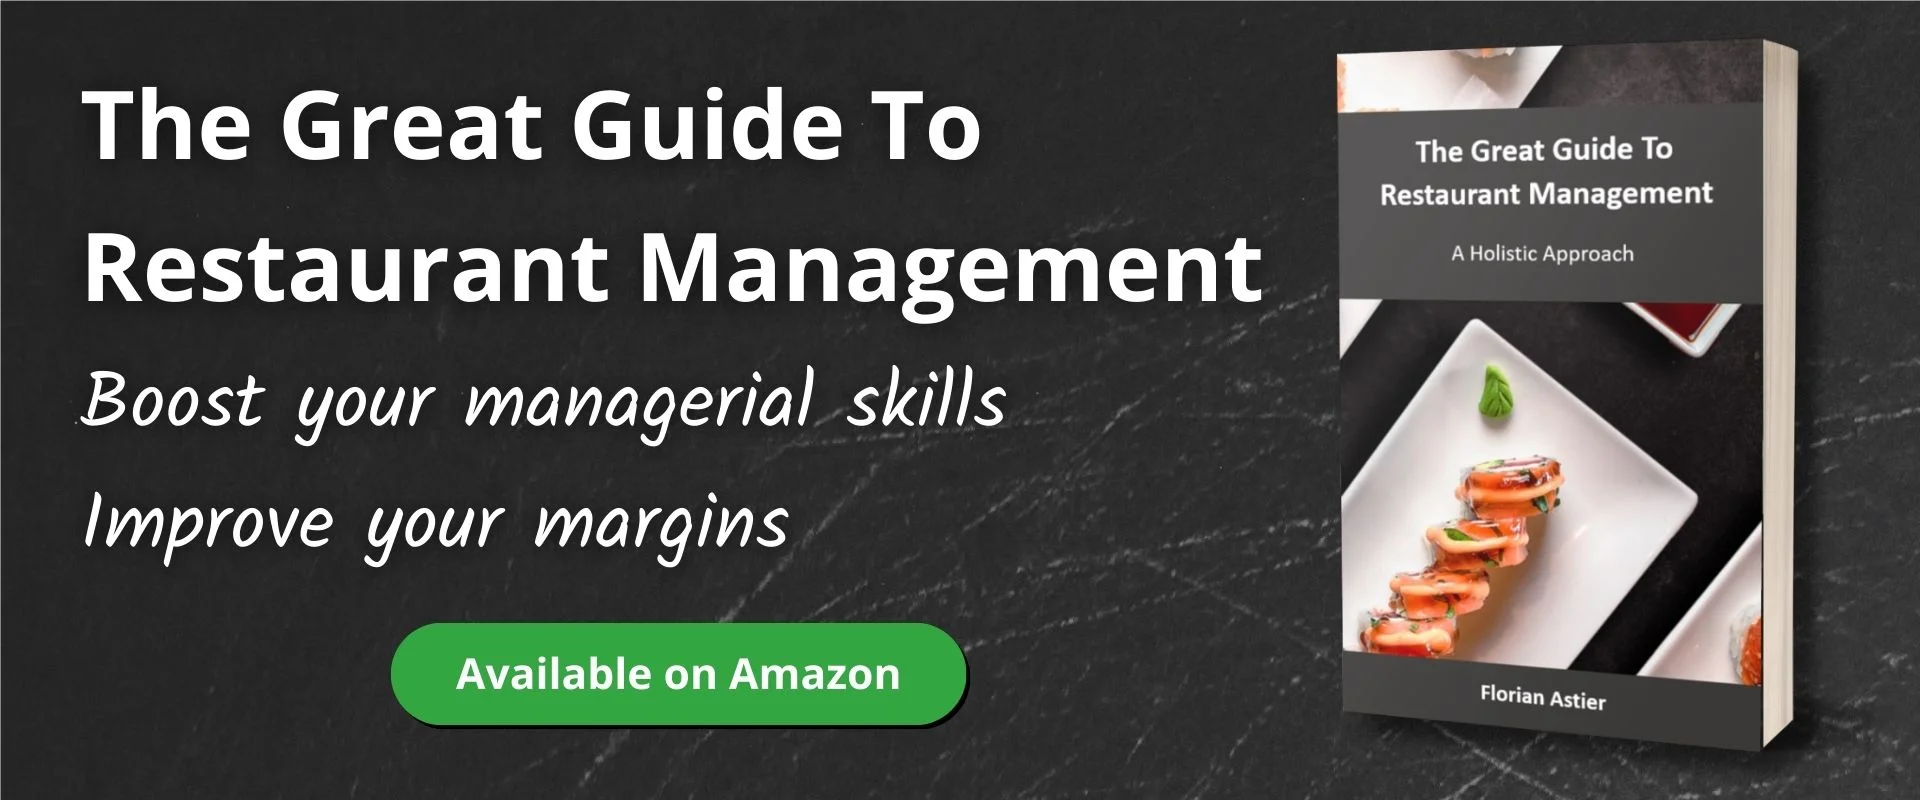 The_Great_Guide_To_Restaurant_Management_Landscape